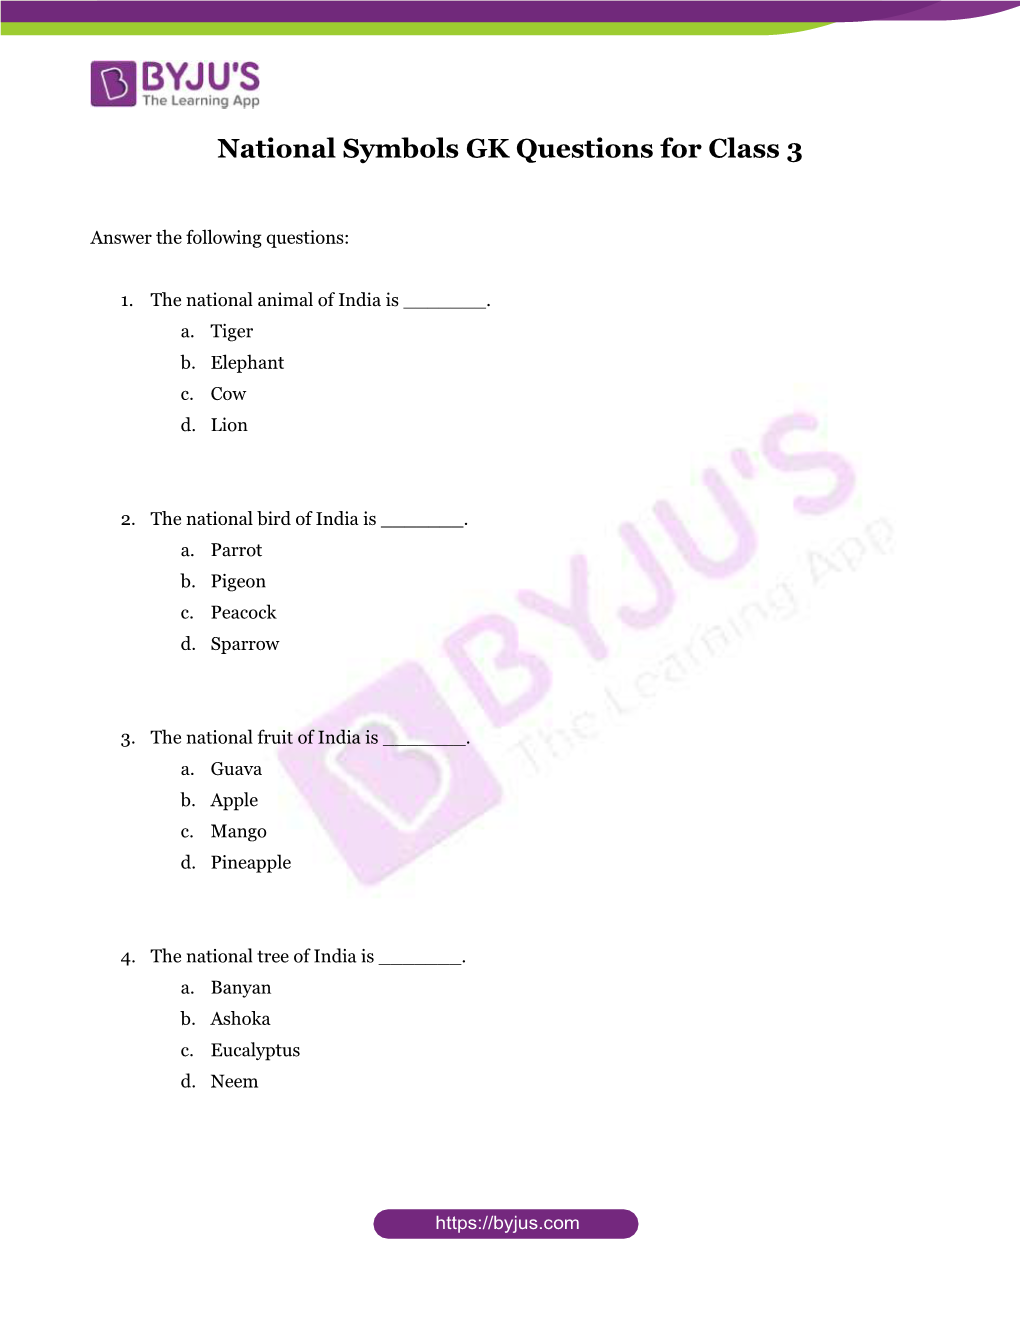 National Symbols GK Questions for Class 3